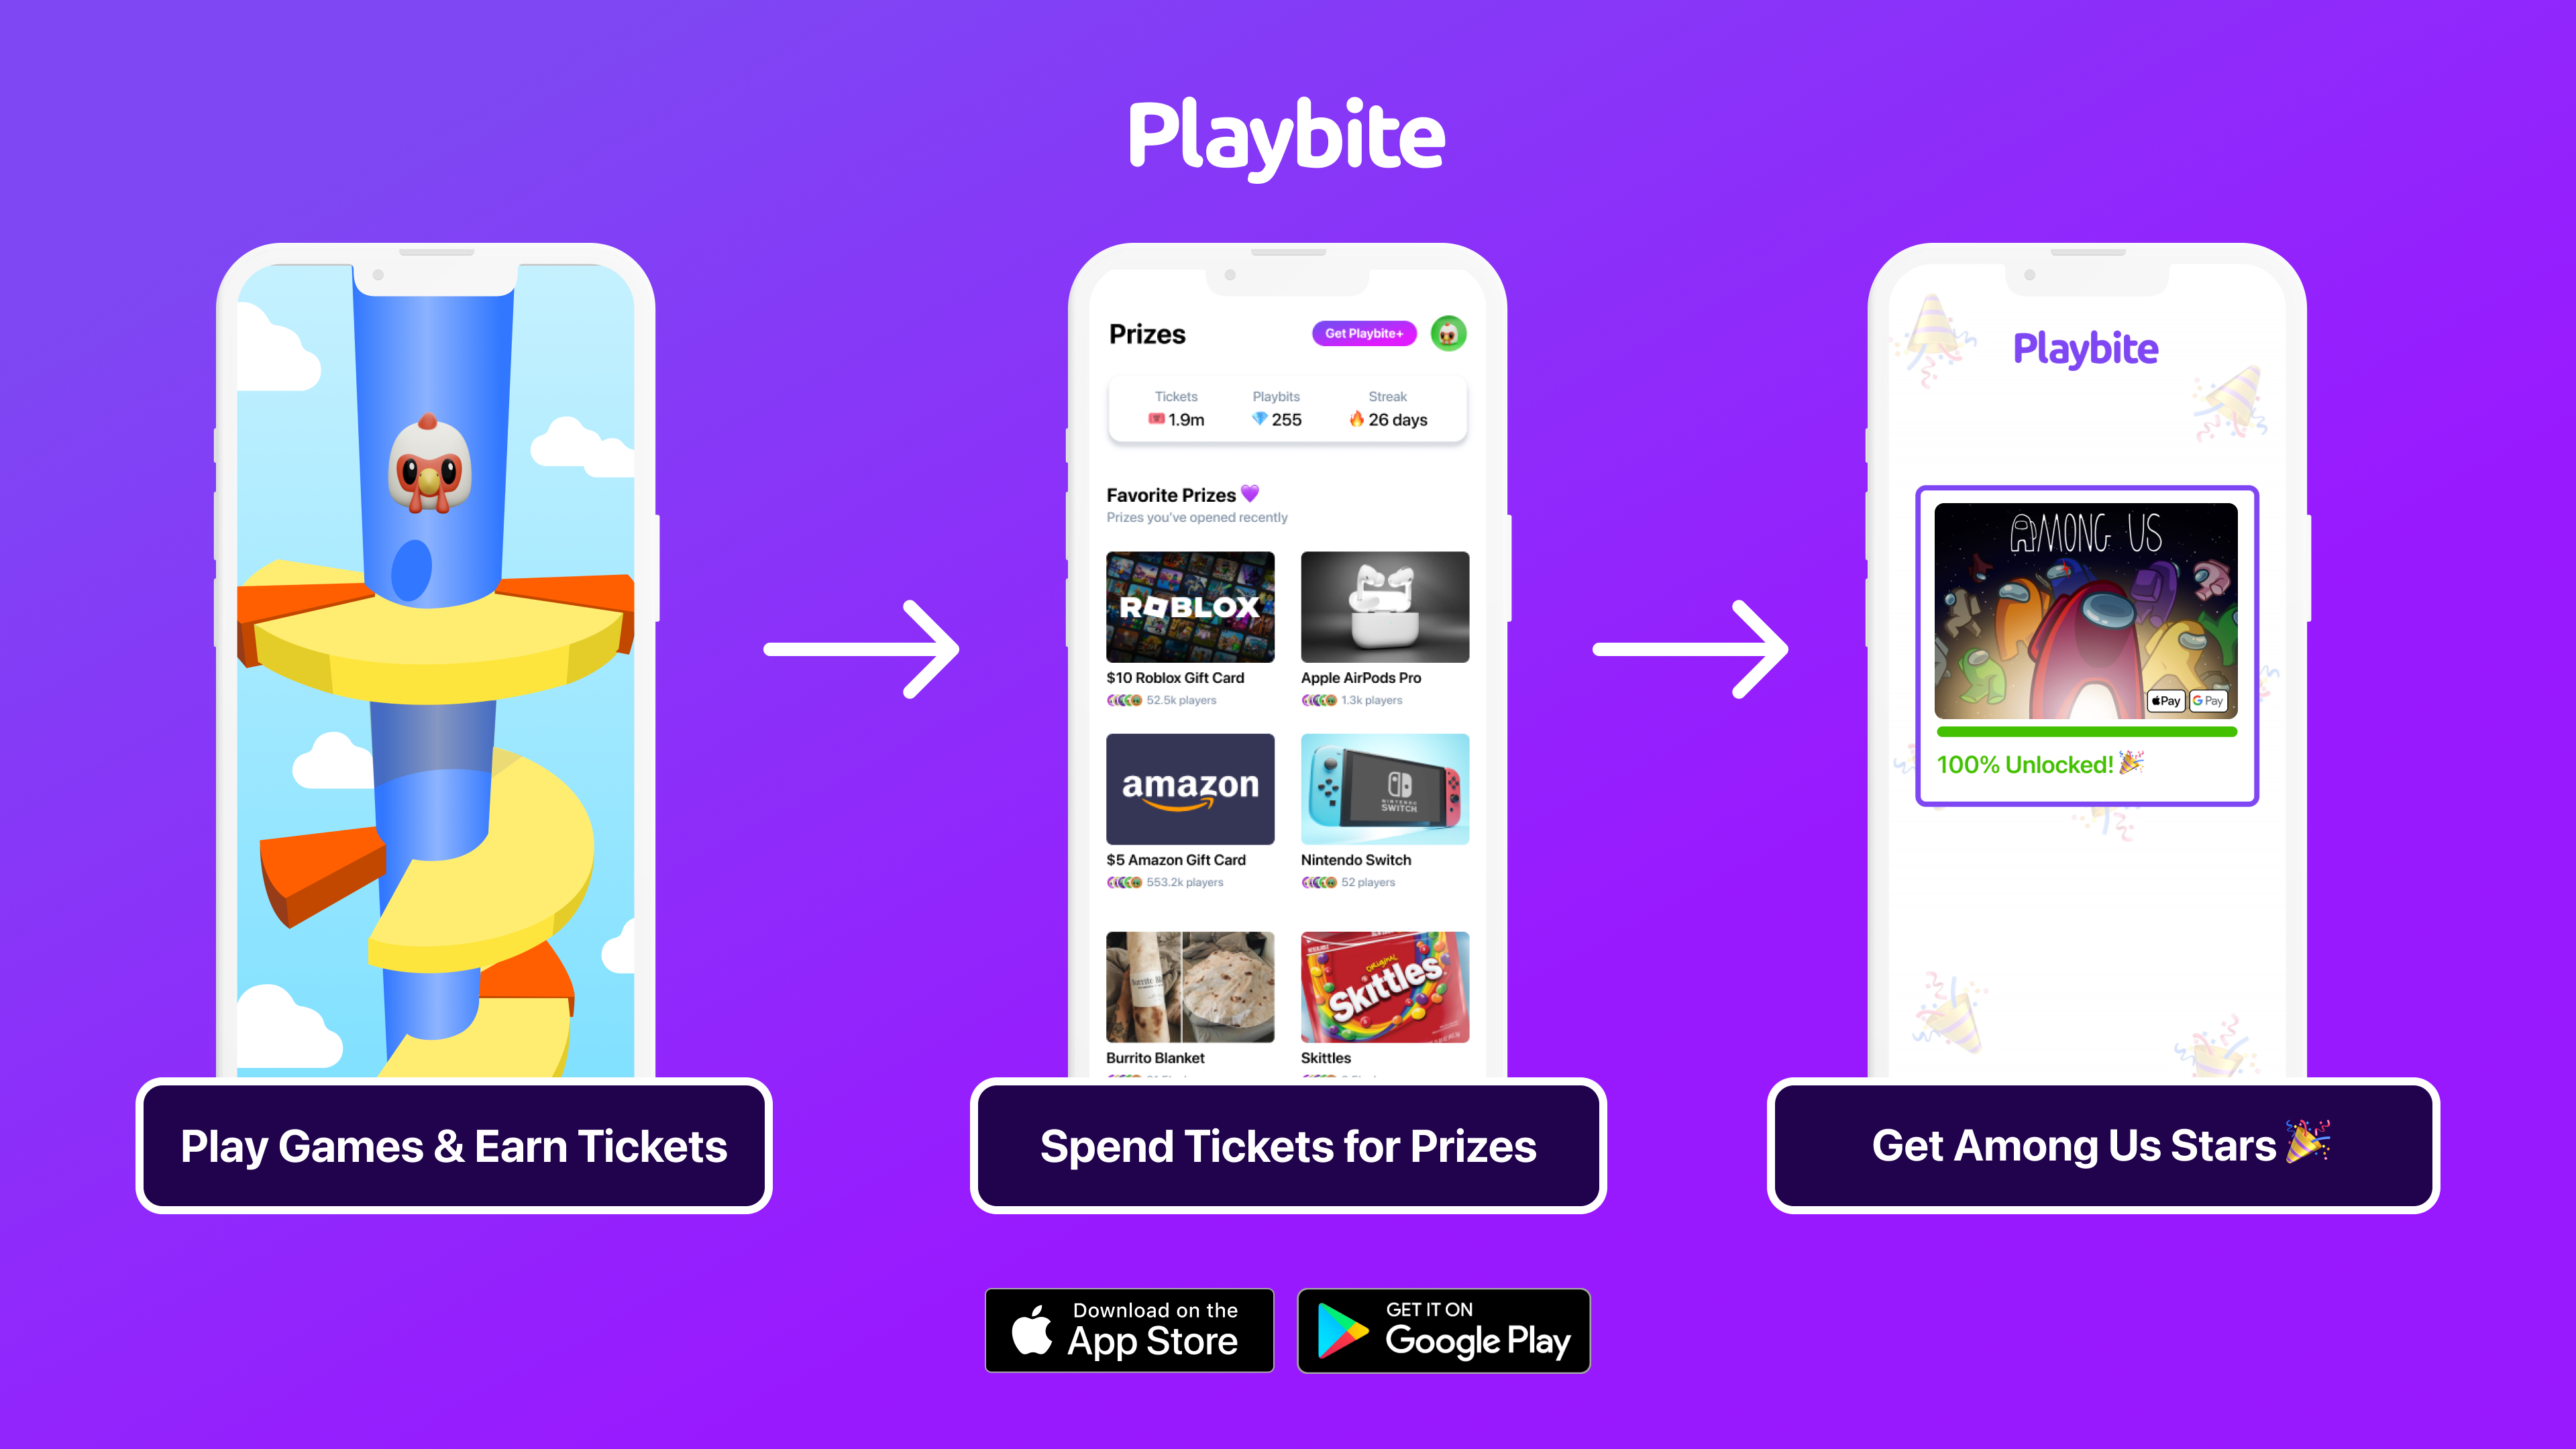 Win Among Us Stars by playing games on Playbite